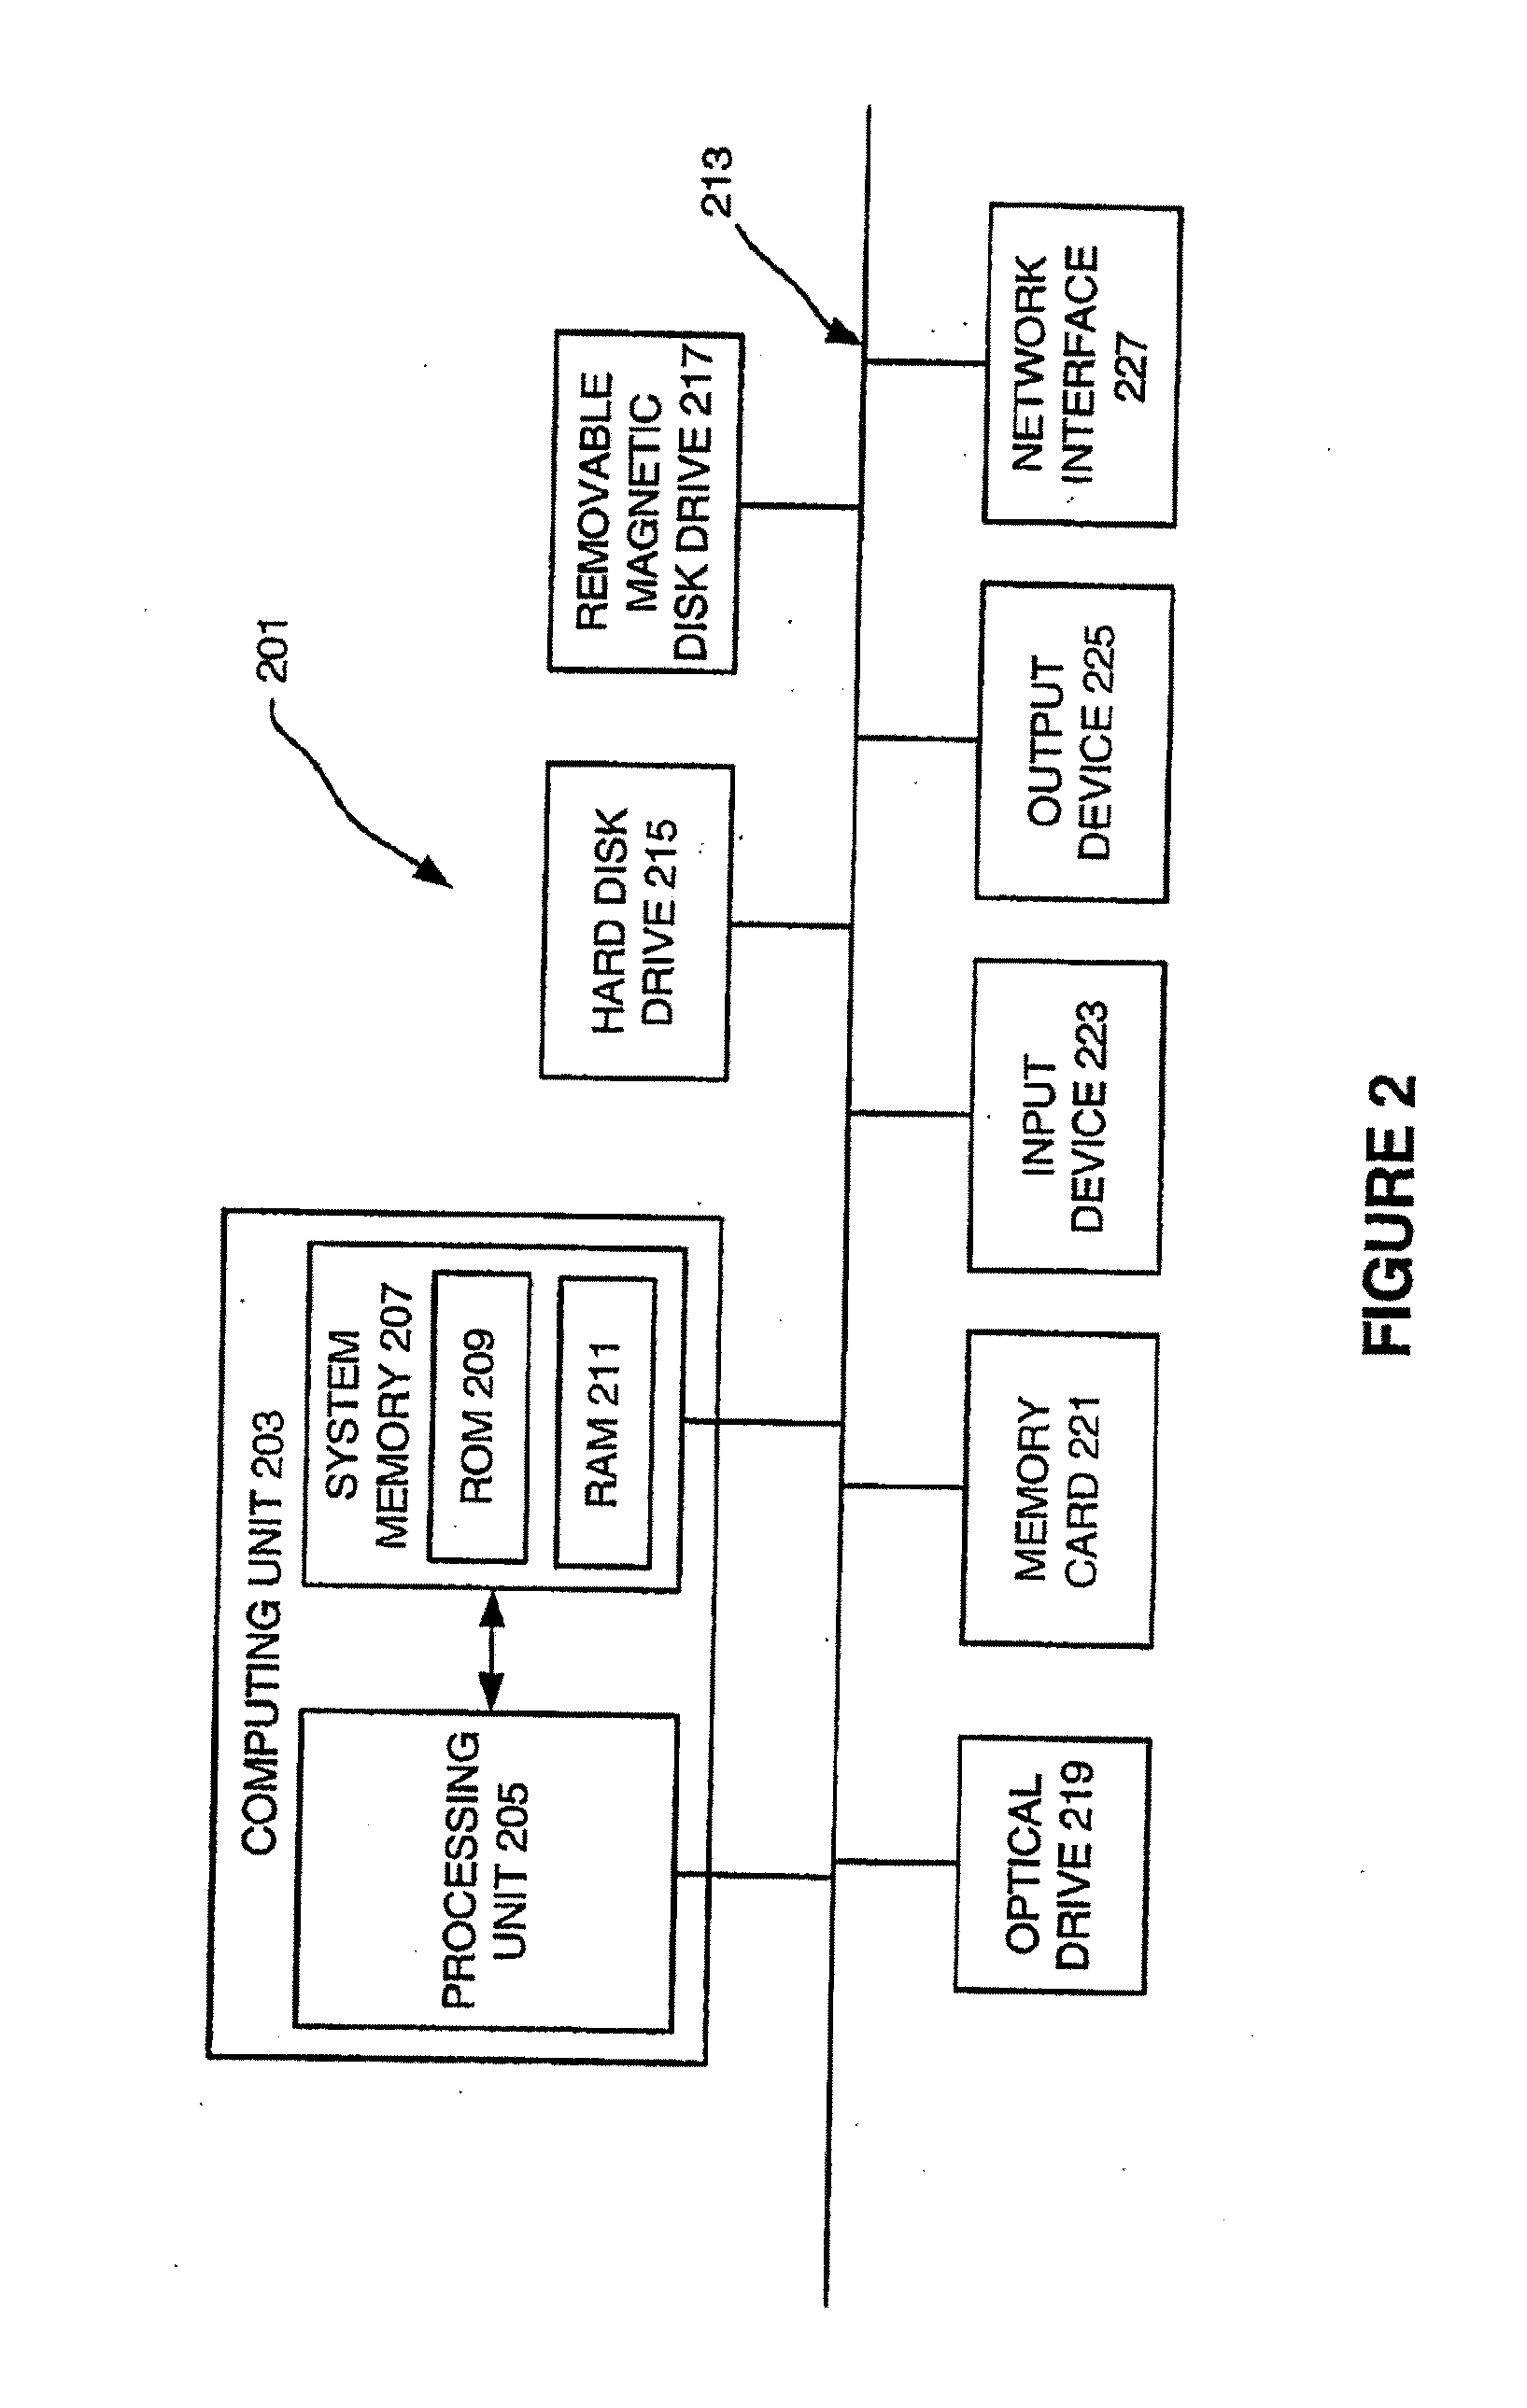 Network metric reporting system